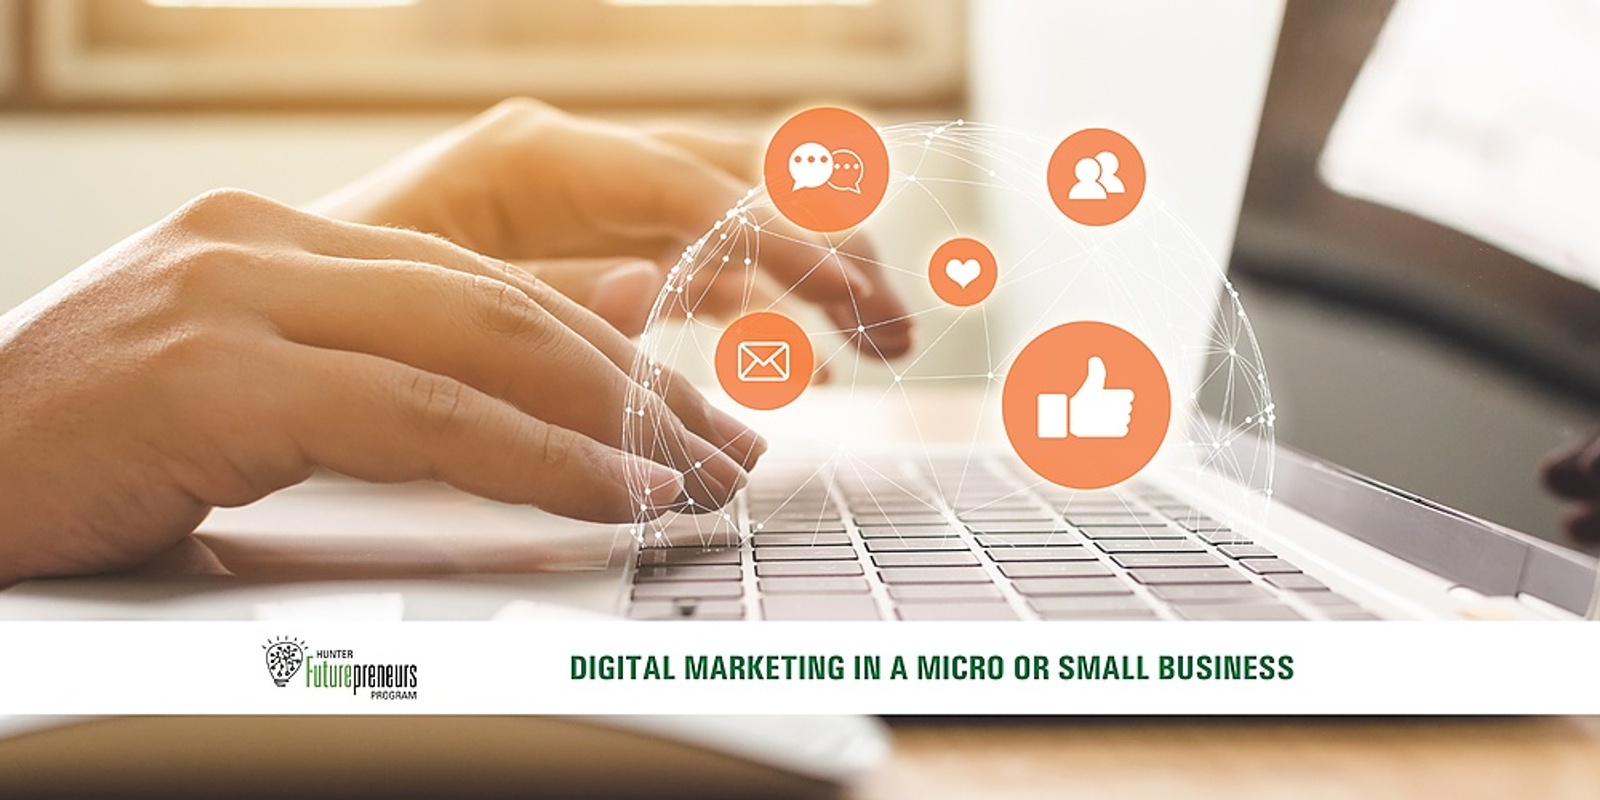 Digital Marketing for Small and Micro Business